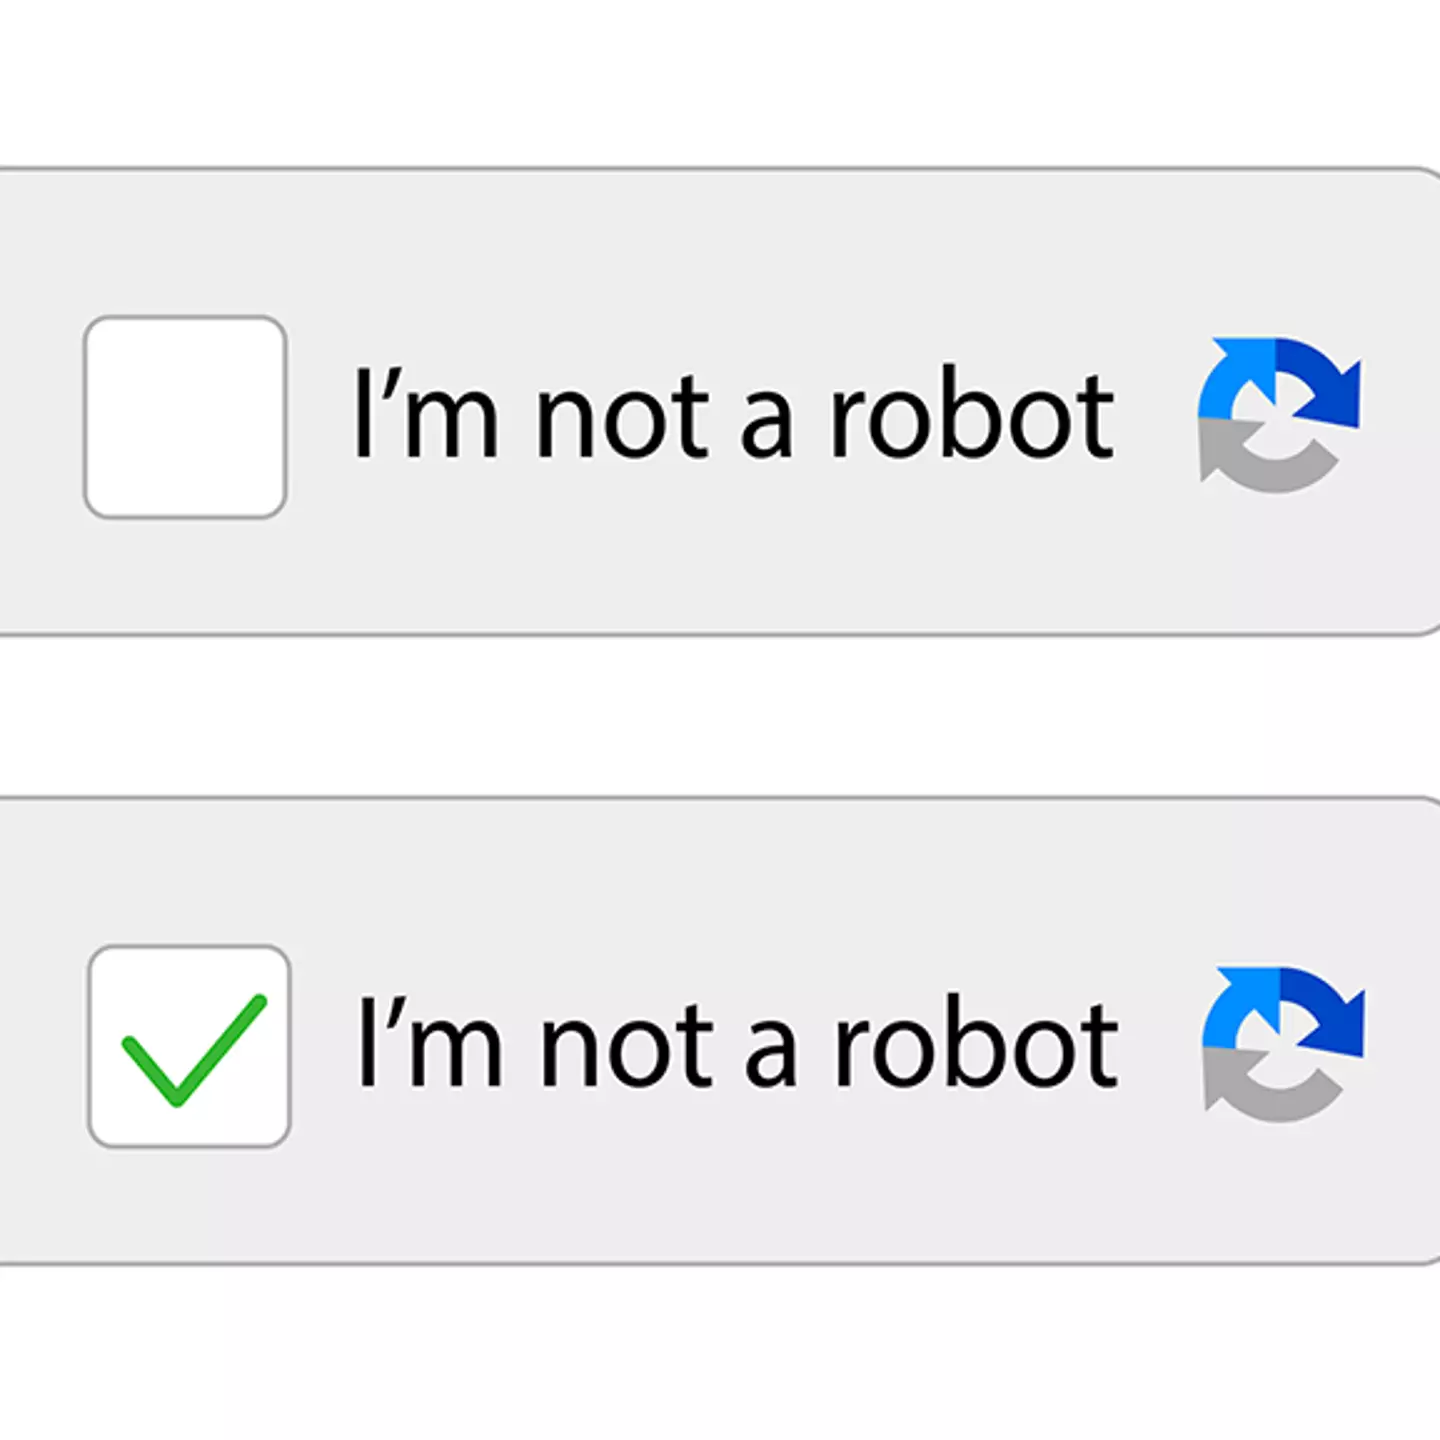 People shocked after finding out what clicking 'I'm not a robot' actually does